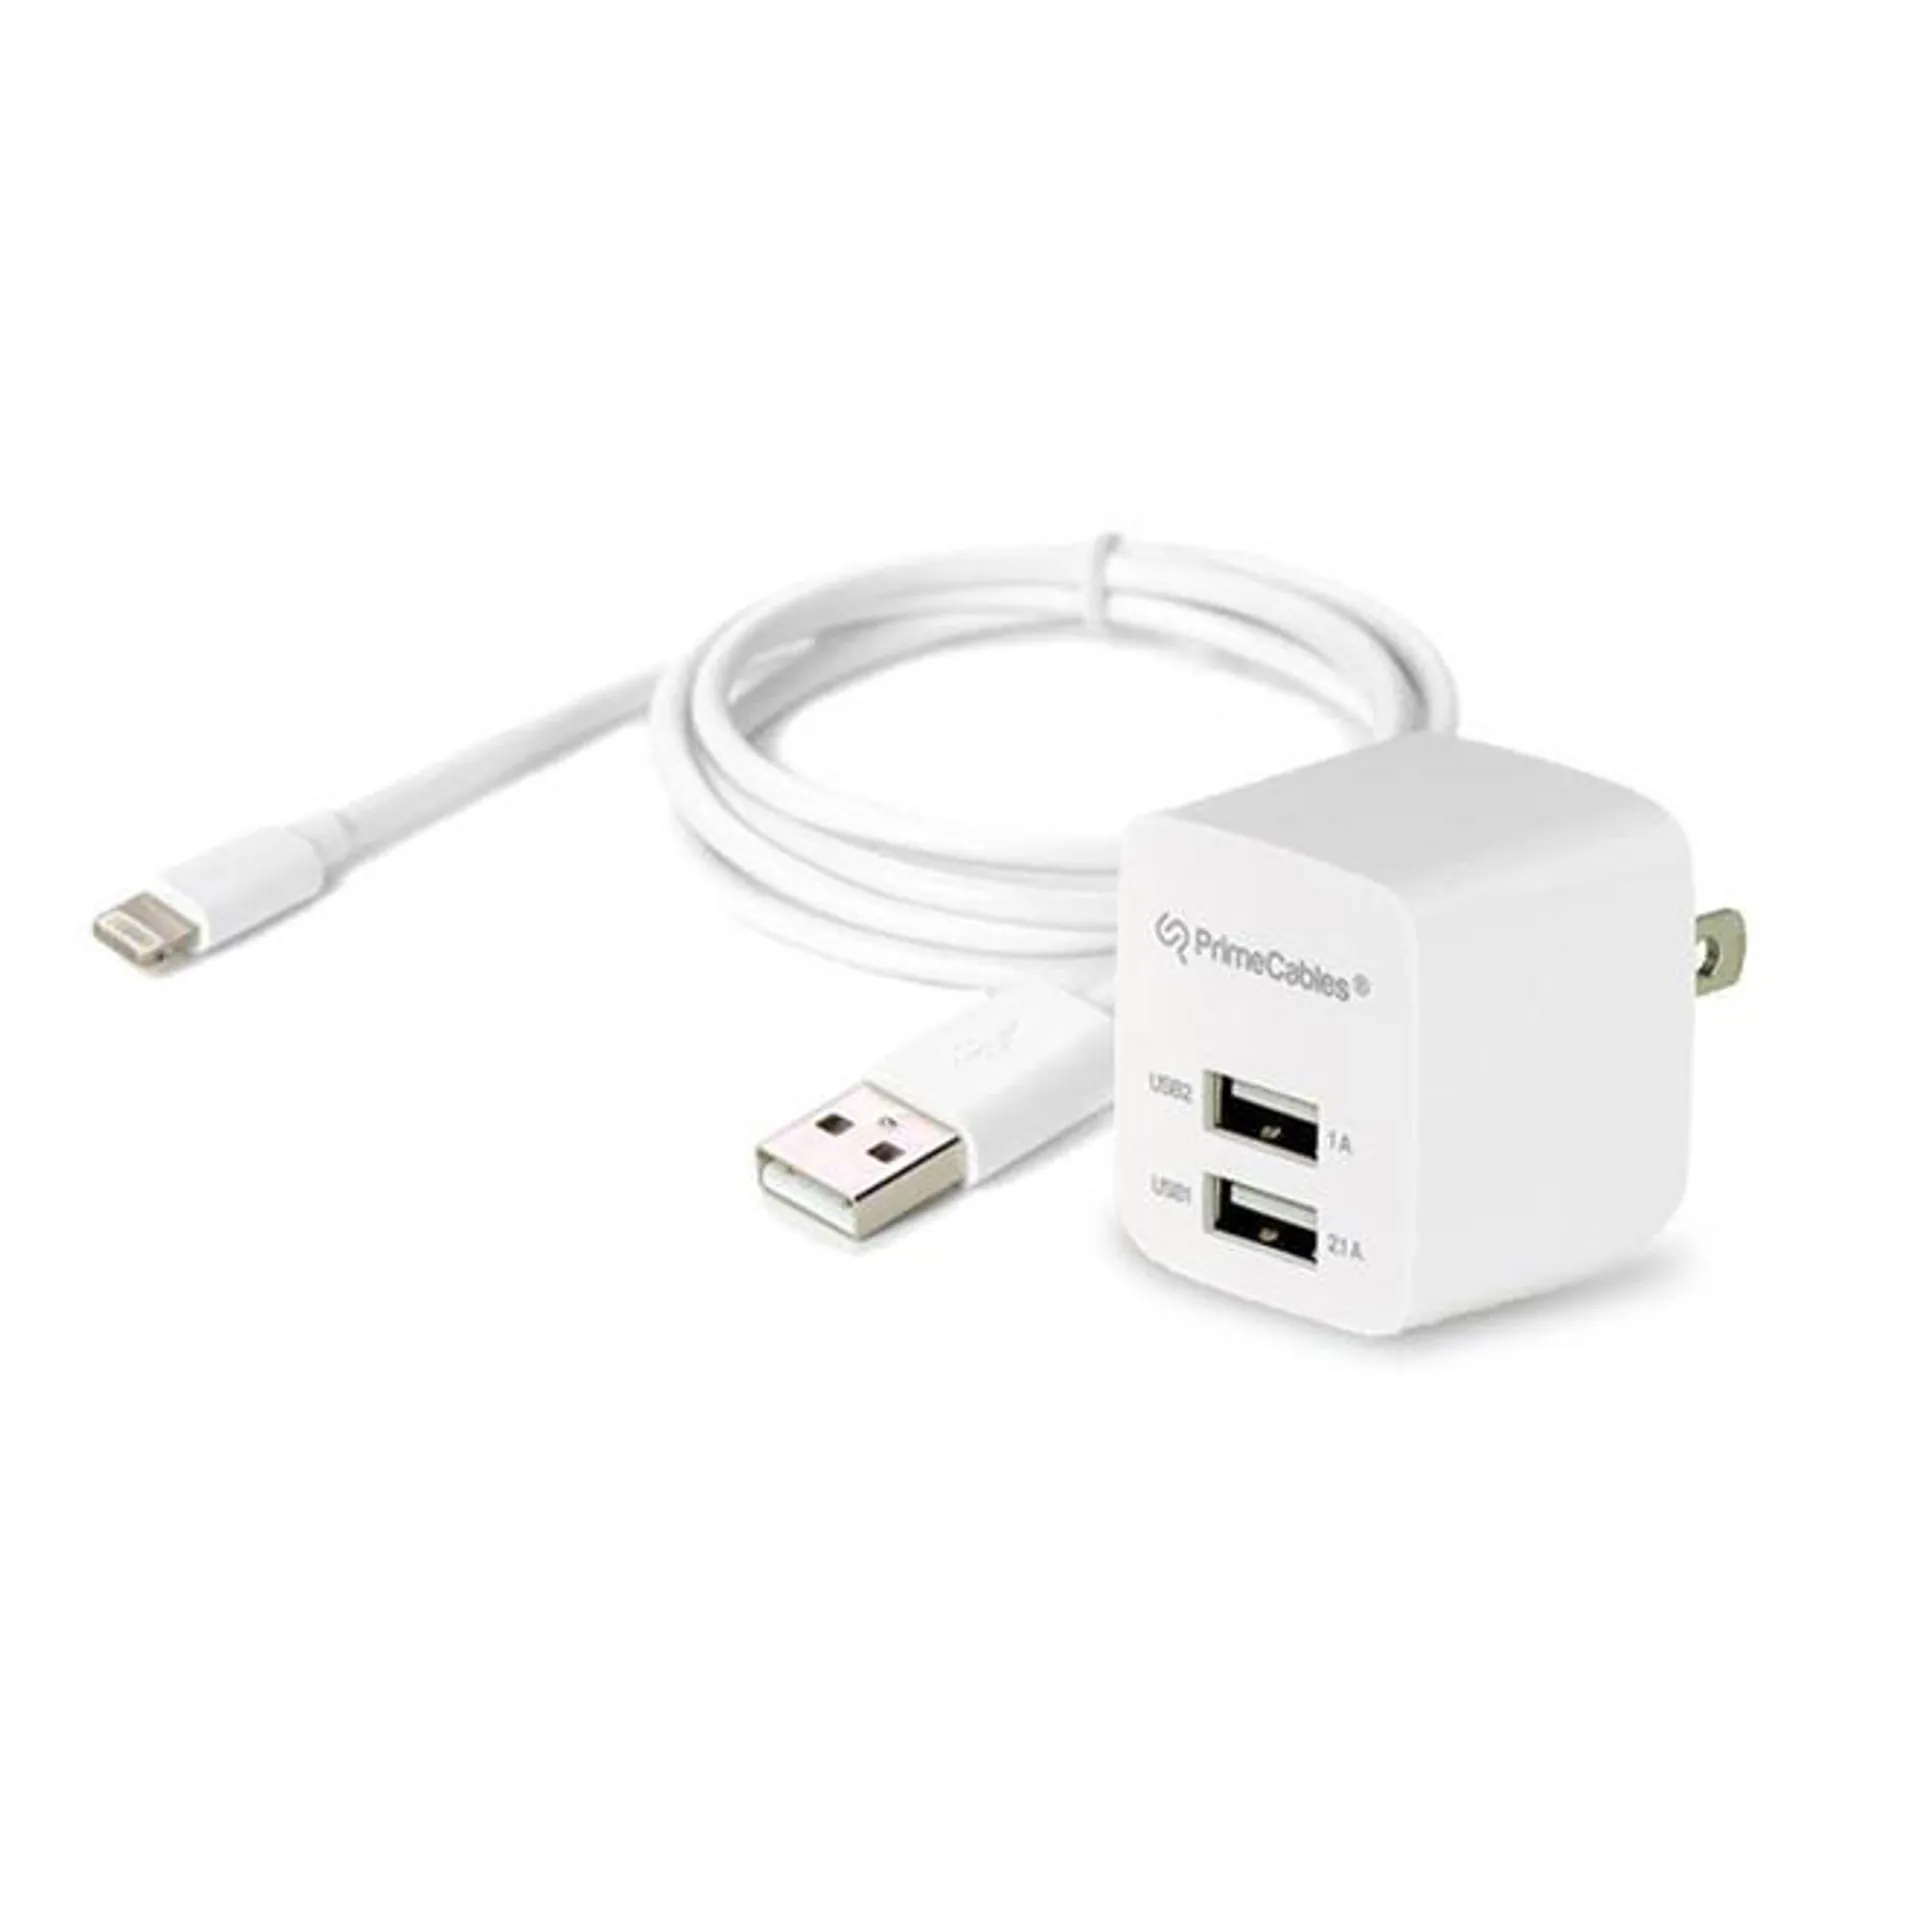 PrimeCables® 1M Lightning Cable, Apple MFi Certified 3FT with Dual USB Port Charger up to 2.1 A